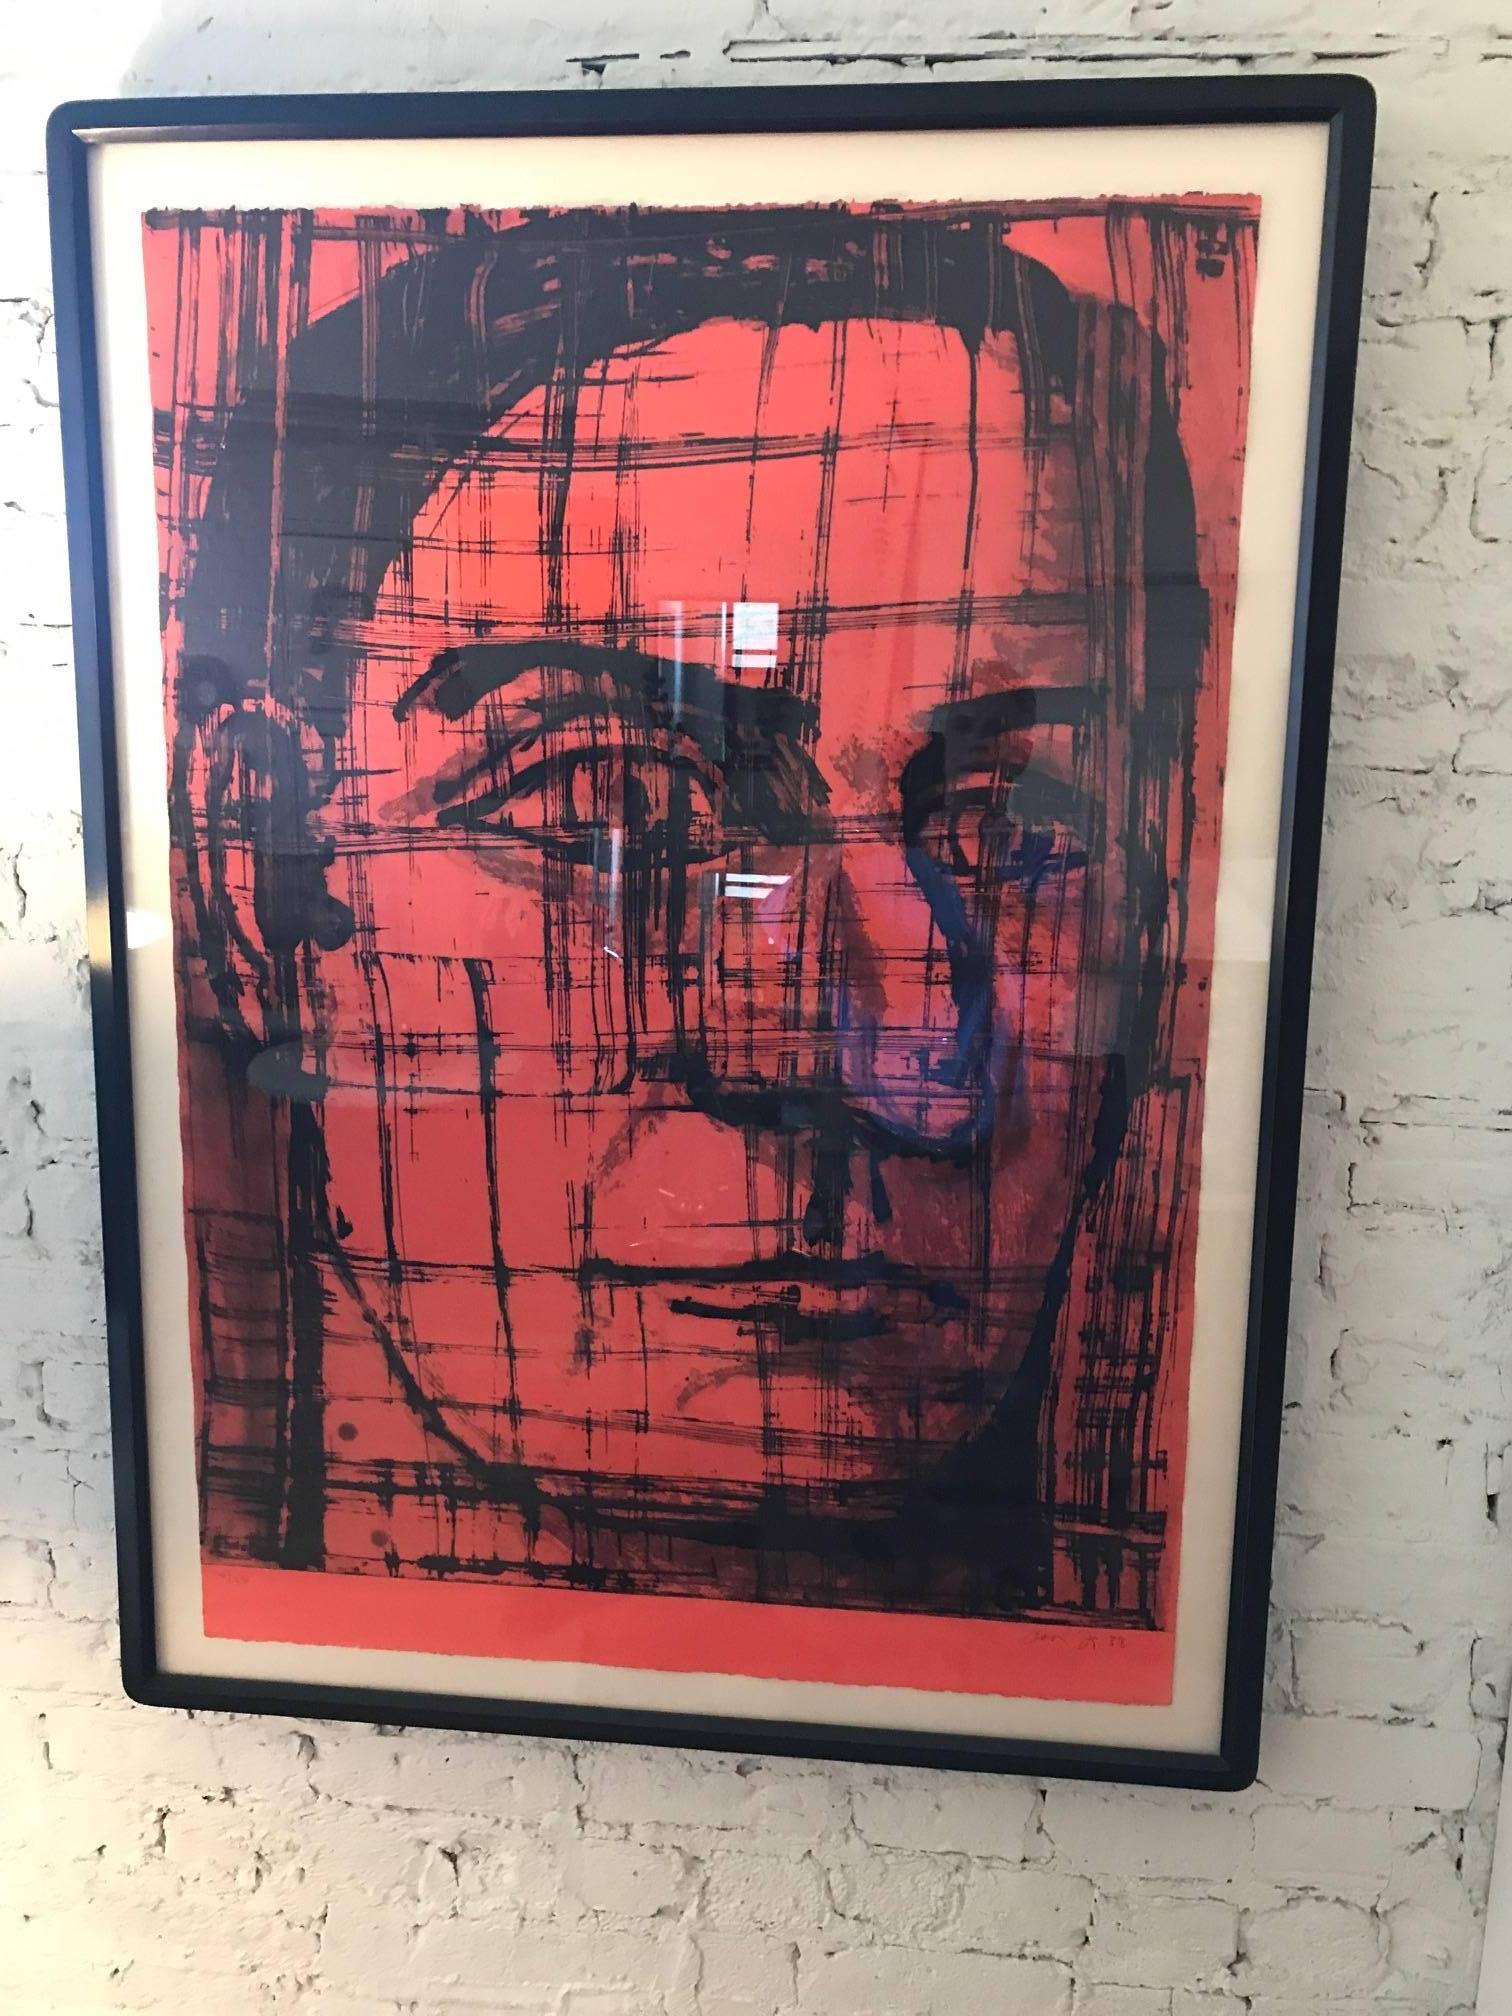 A large-scale red and black lithograph by American artist Aaron Fink. The work is titled Portrait. It is signed and dated Aaron F 88.
Edition 4/25. Fink's work has been exhibited widely throughout the United States, Europe, Japan, and Australia.